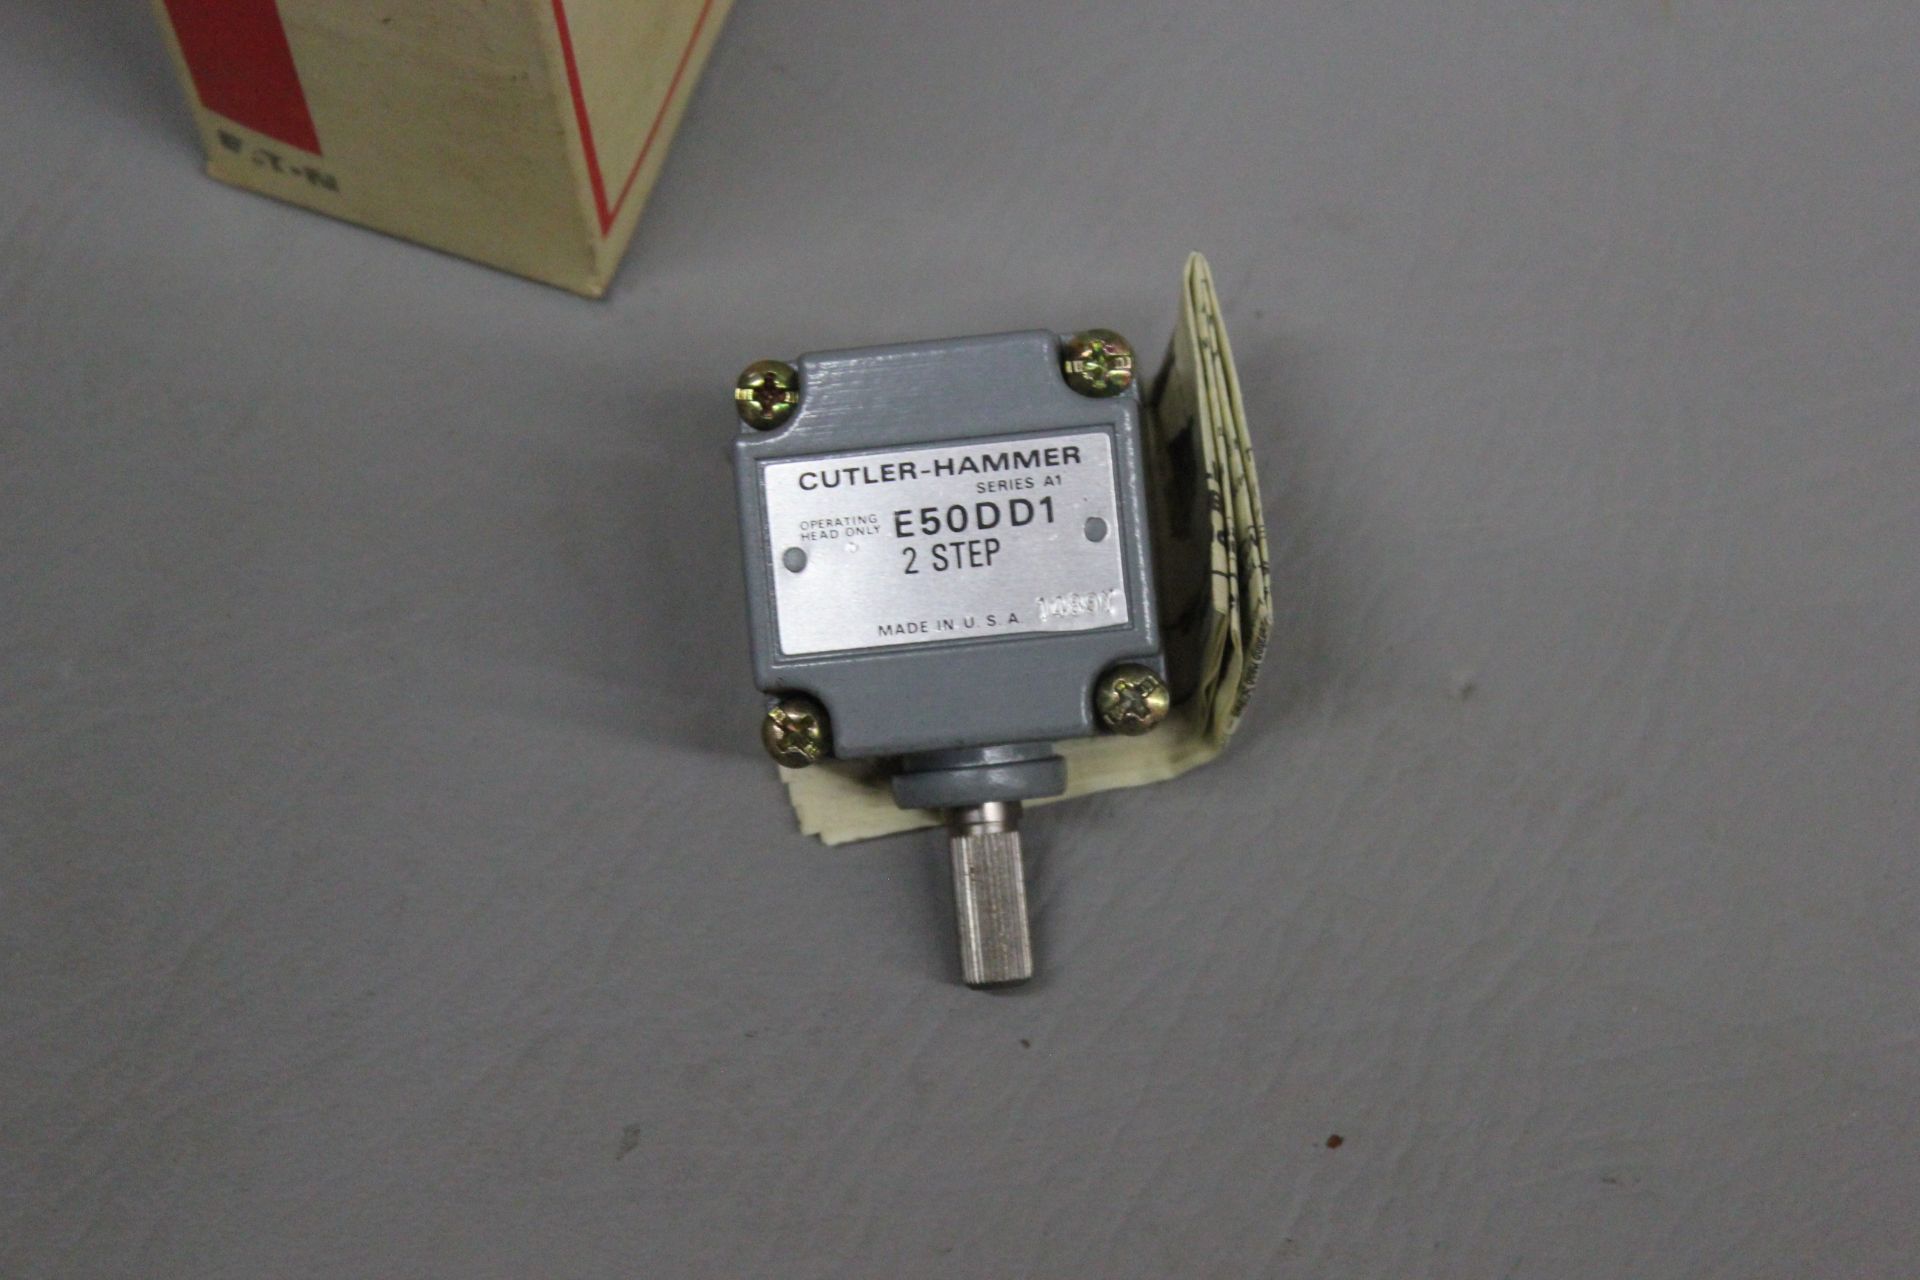 NEW OLD STOCK CUTLER HAMMER LIMIT SWITCH OPERATING HEAD - Image 2 of 3